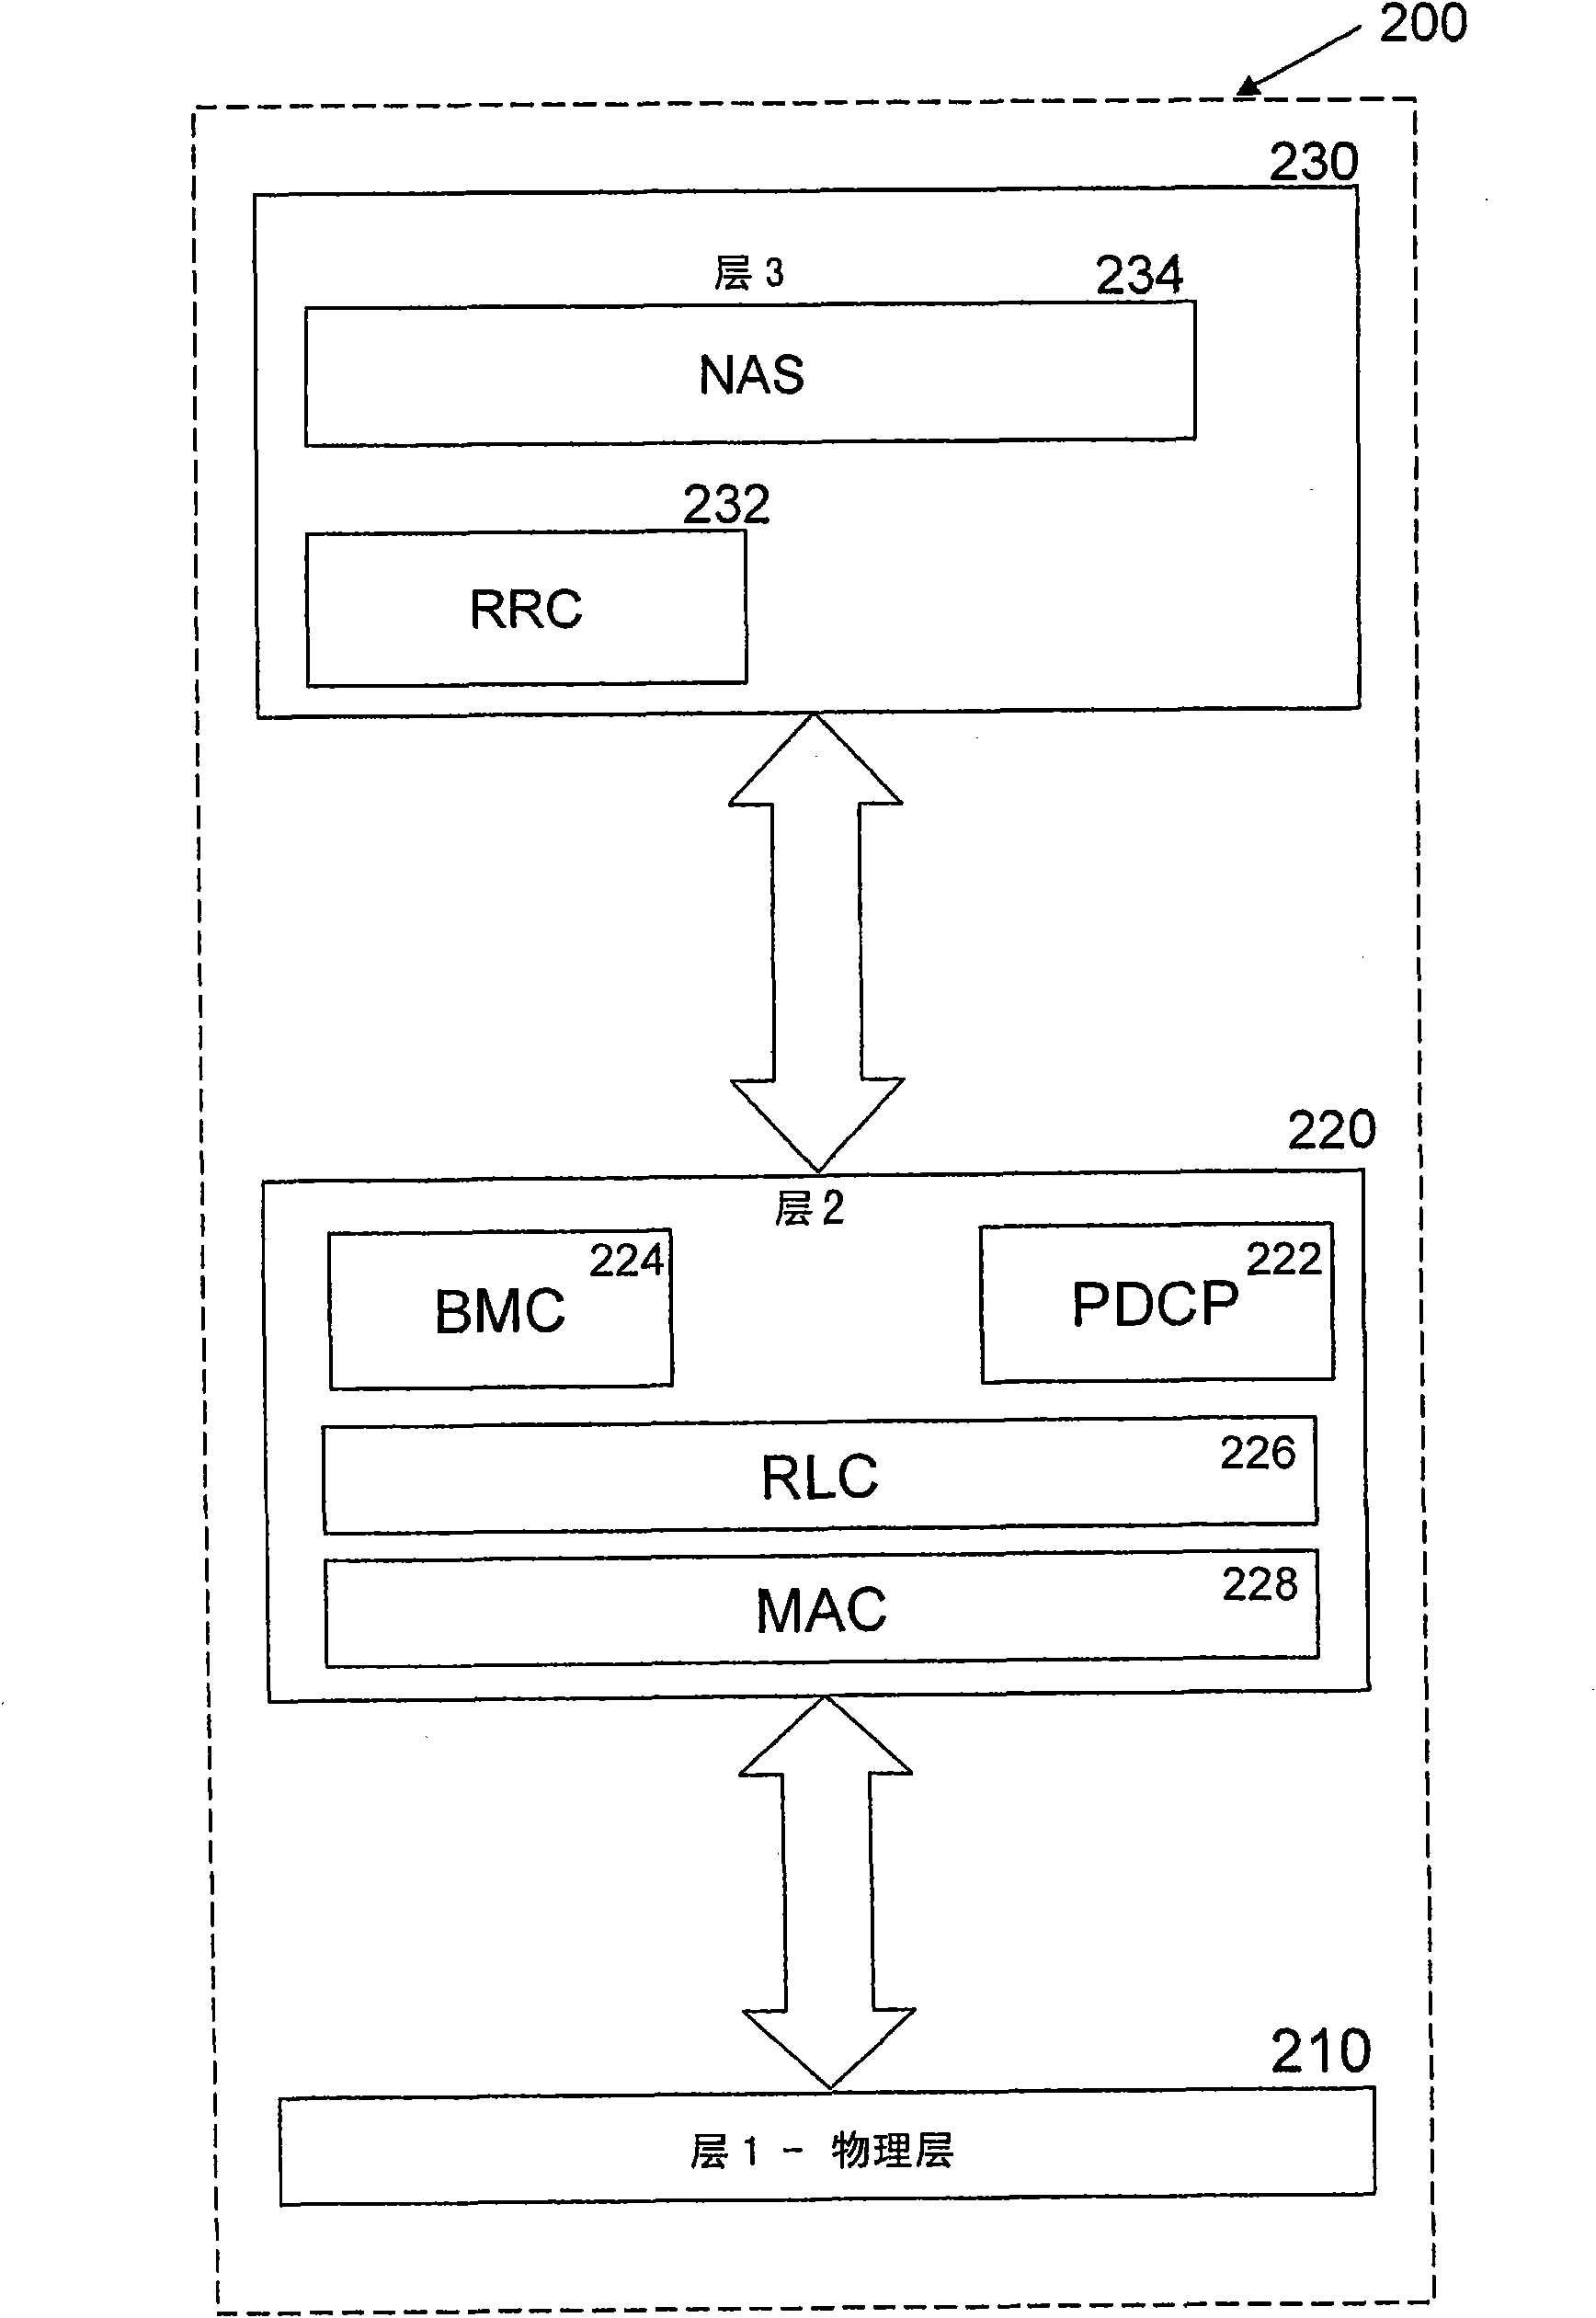 A method and apparatus having improved handling of state transitions